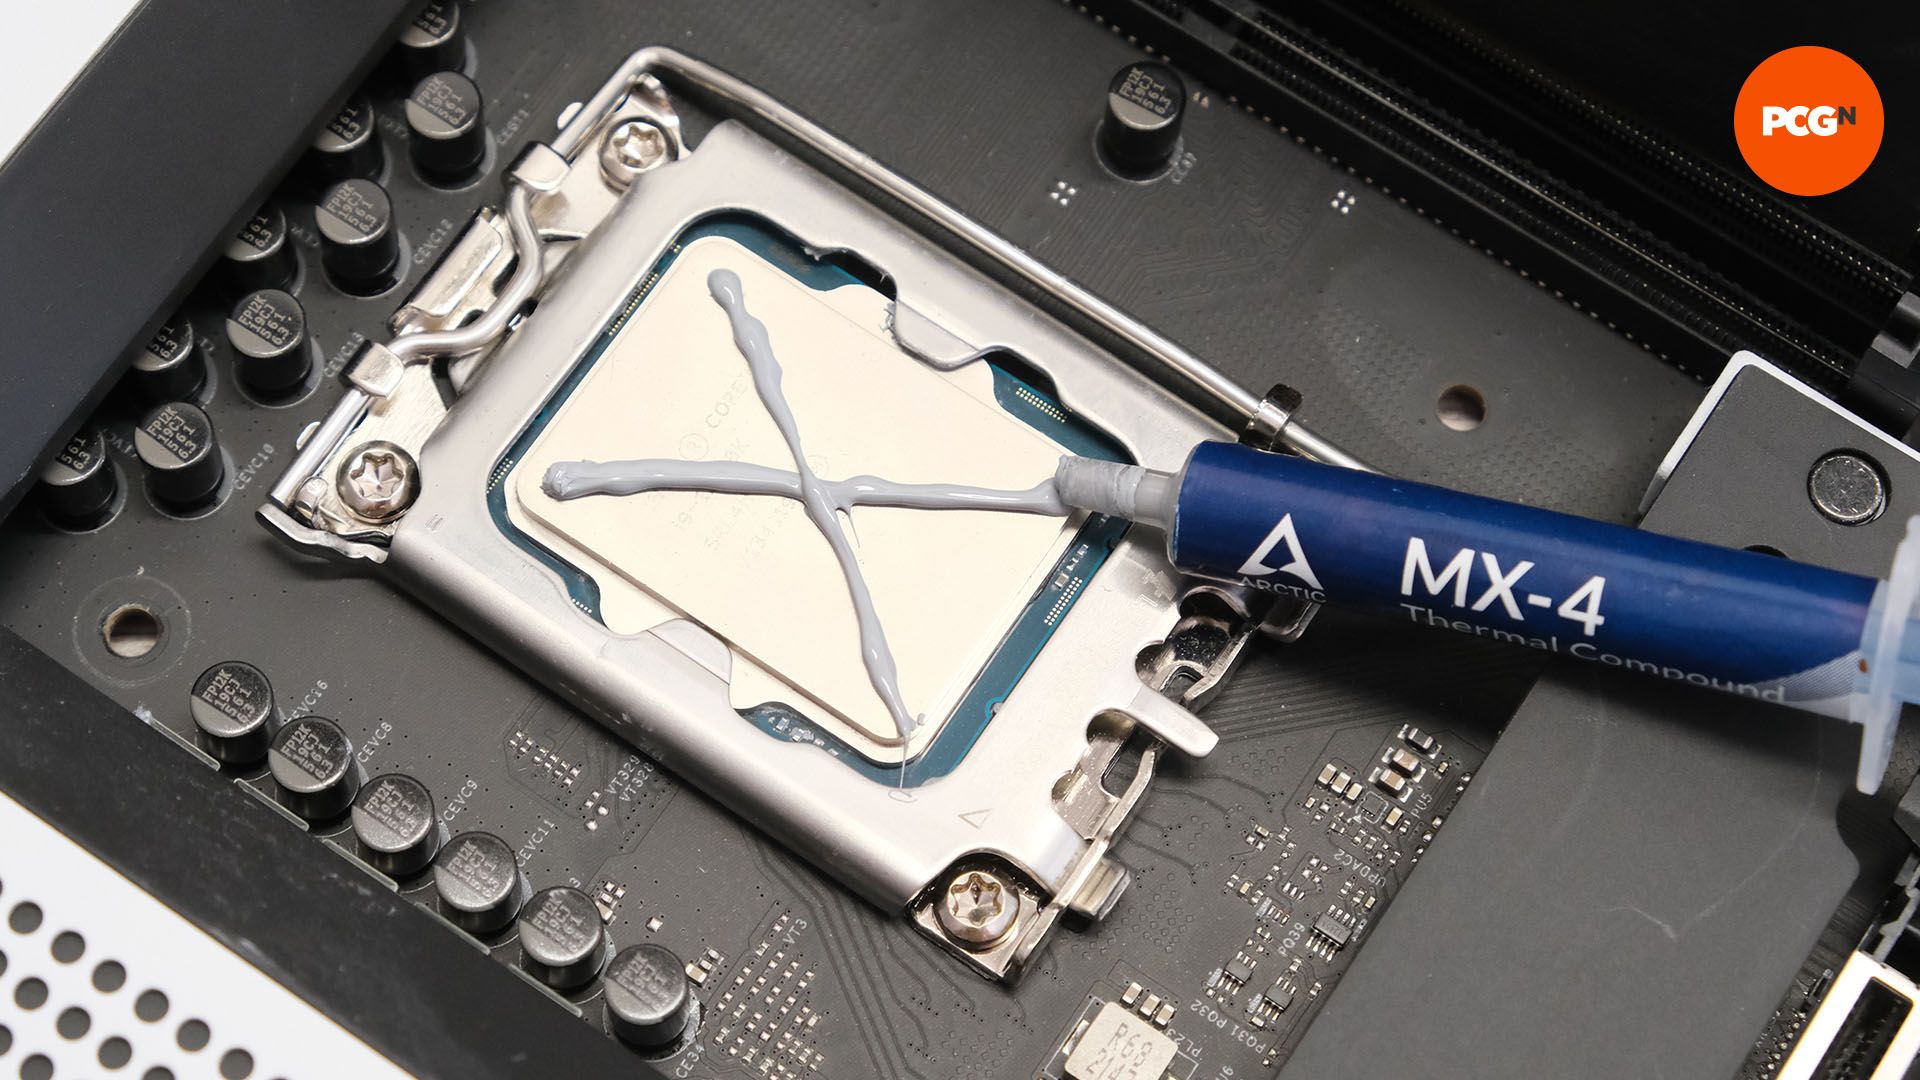 An X is drawn in thermal paste on the CPU sitting in the socket on the motherboard